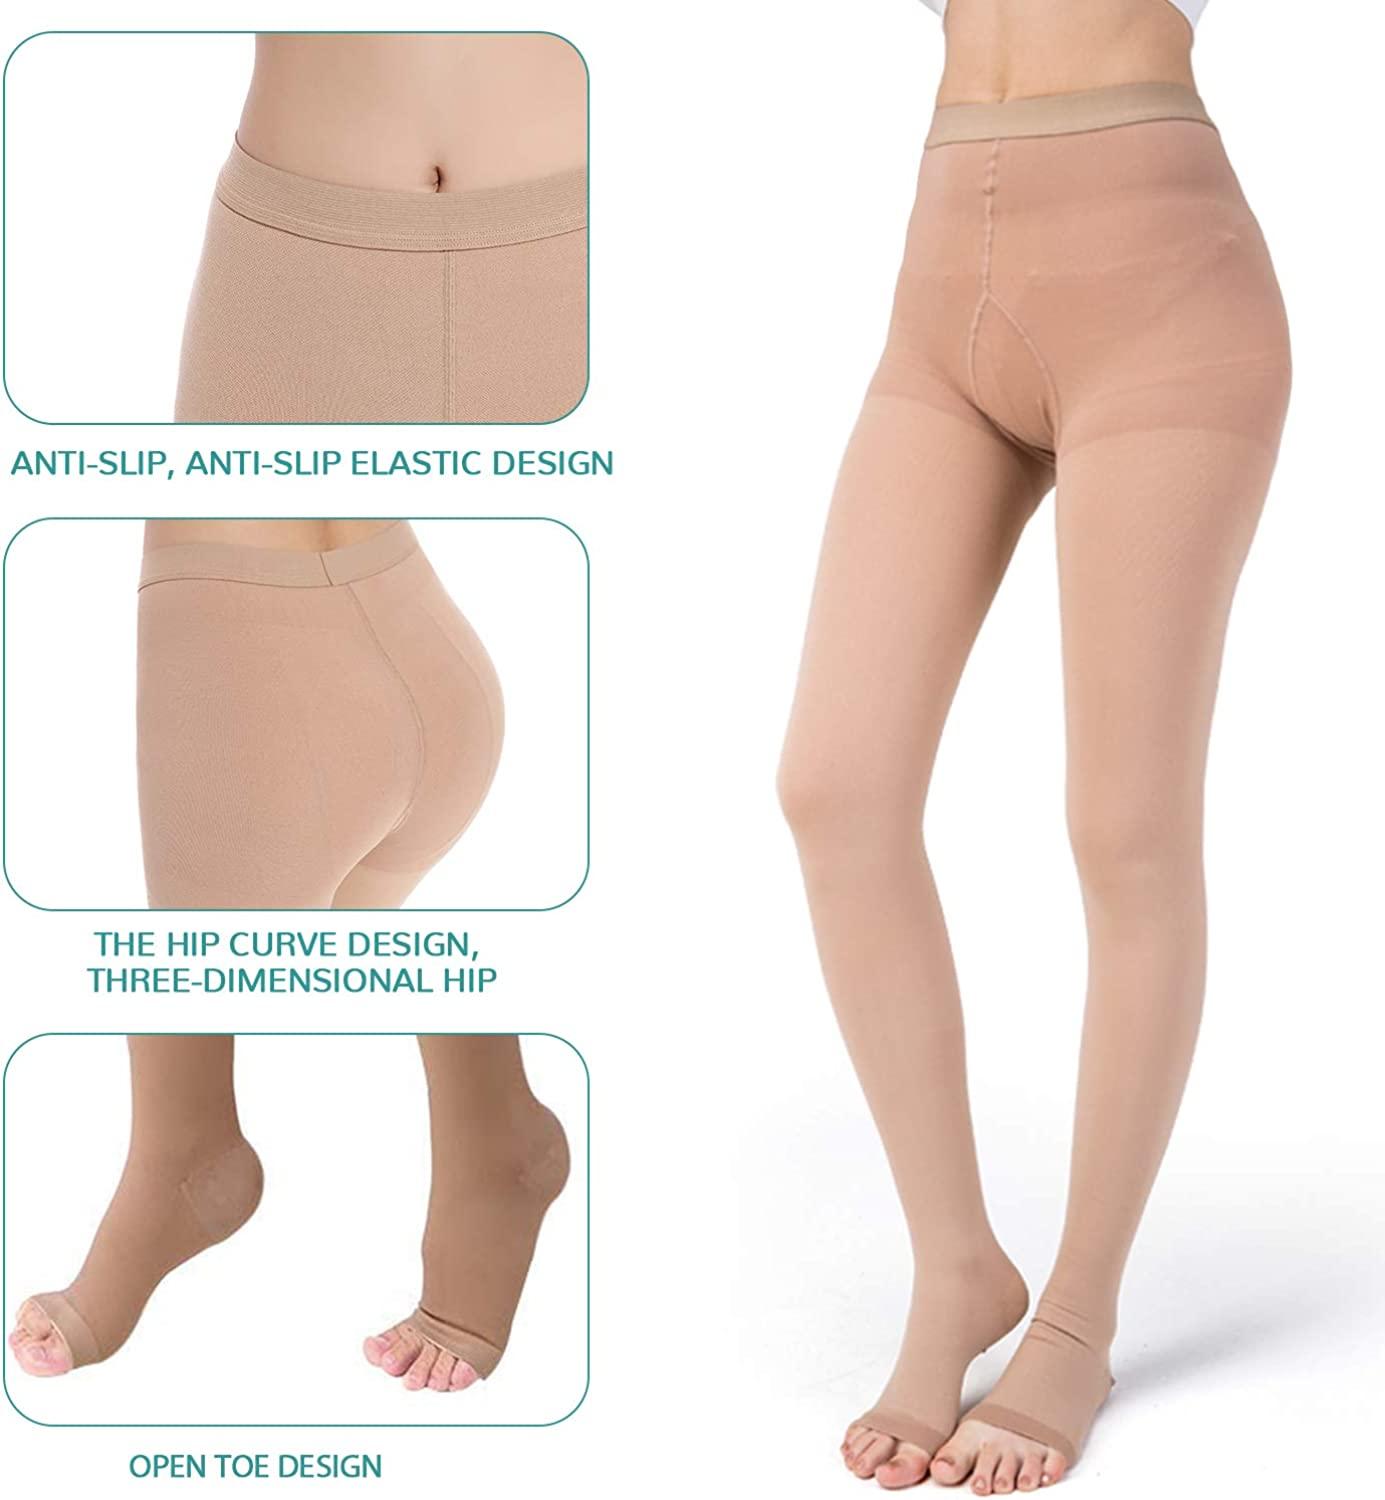  Plus Size Opaque Compression Pantyhose For Women 20-30mmHg -  Toeless Graduated Support Compression Tights For Post Surgery